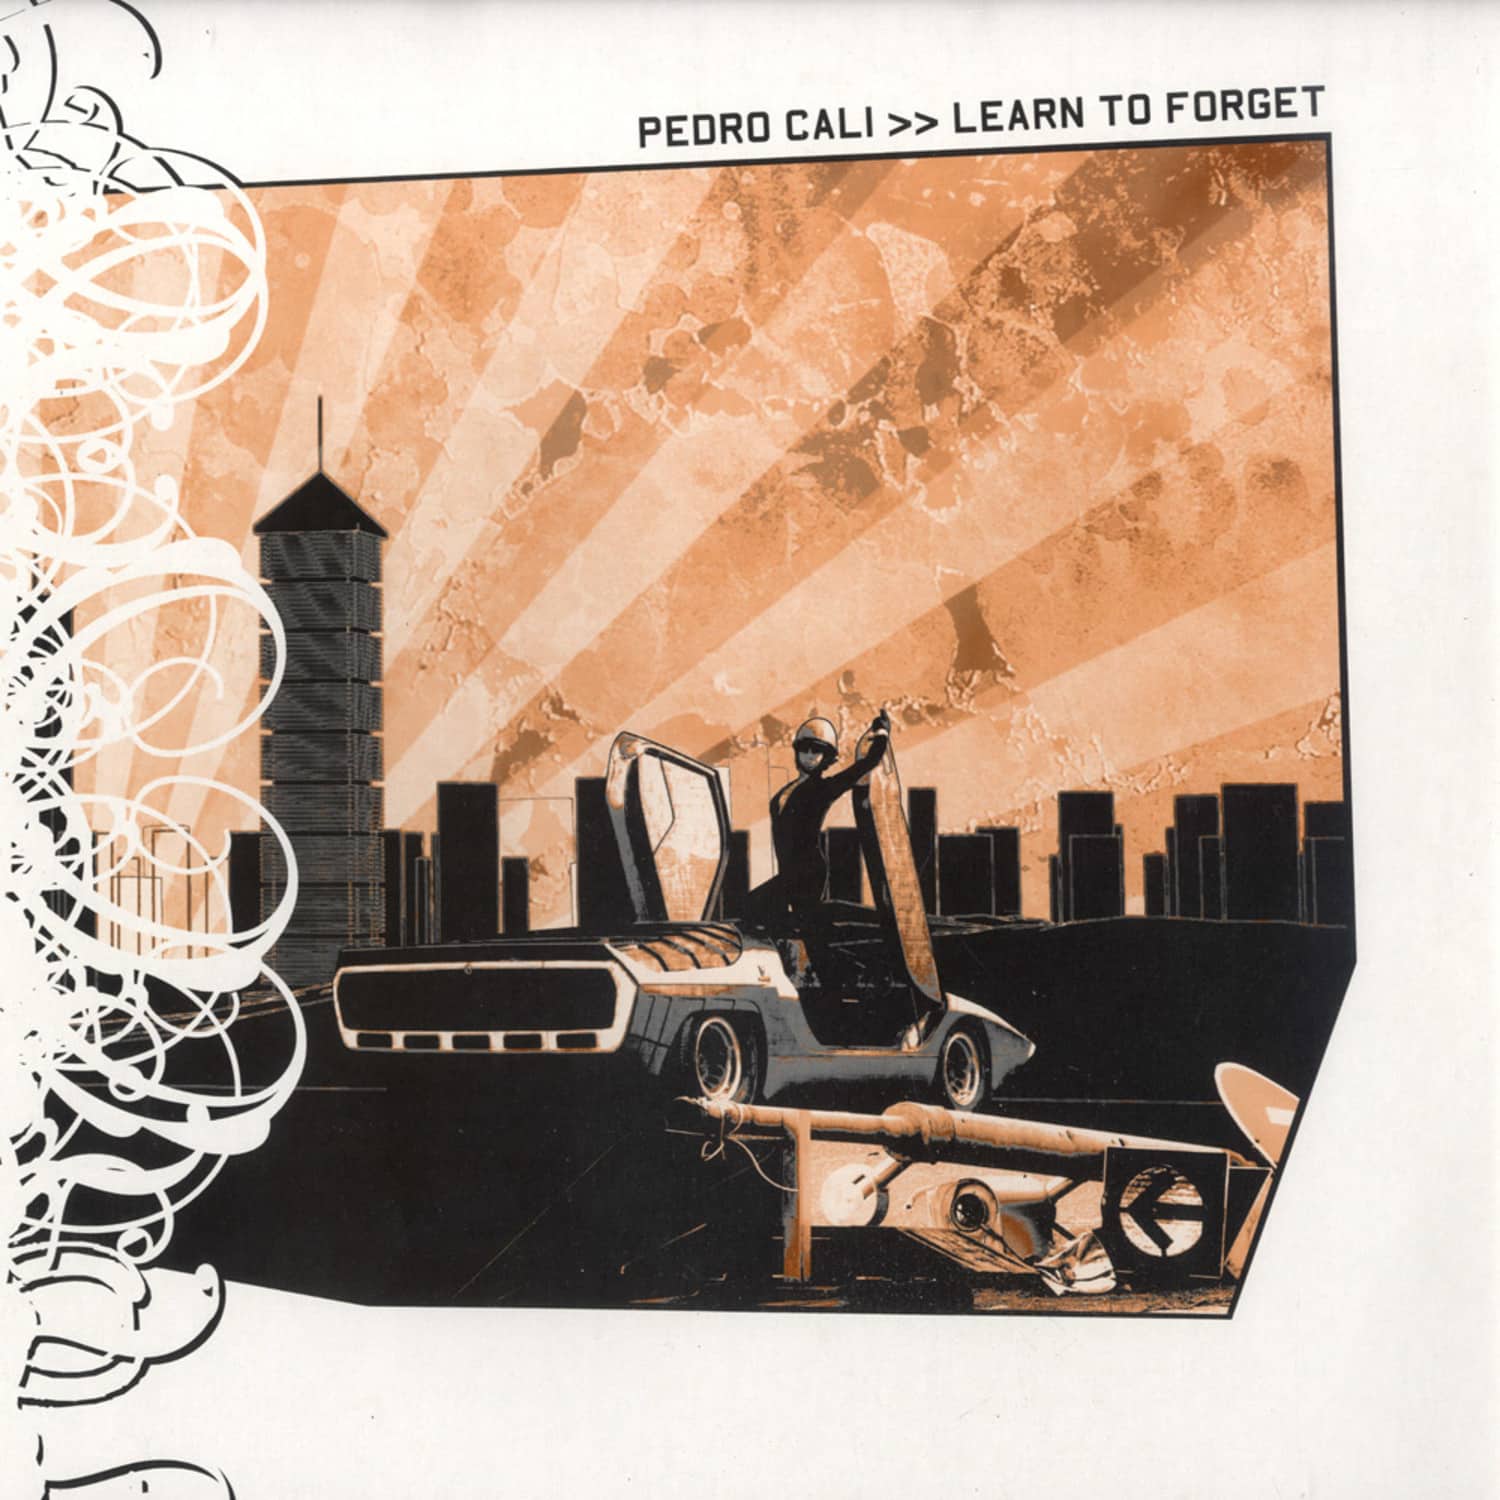 Pedro Cali - LEARN TO FORGET EP